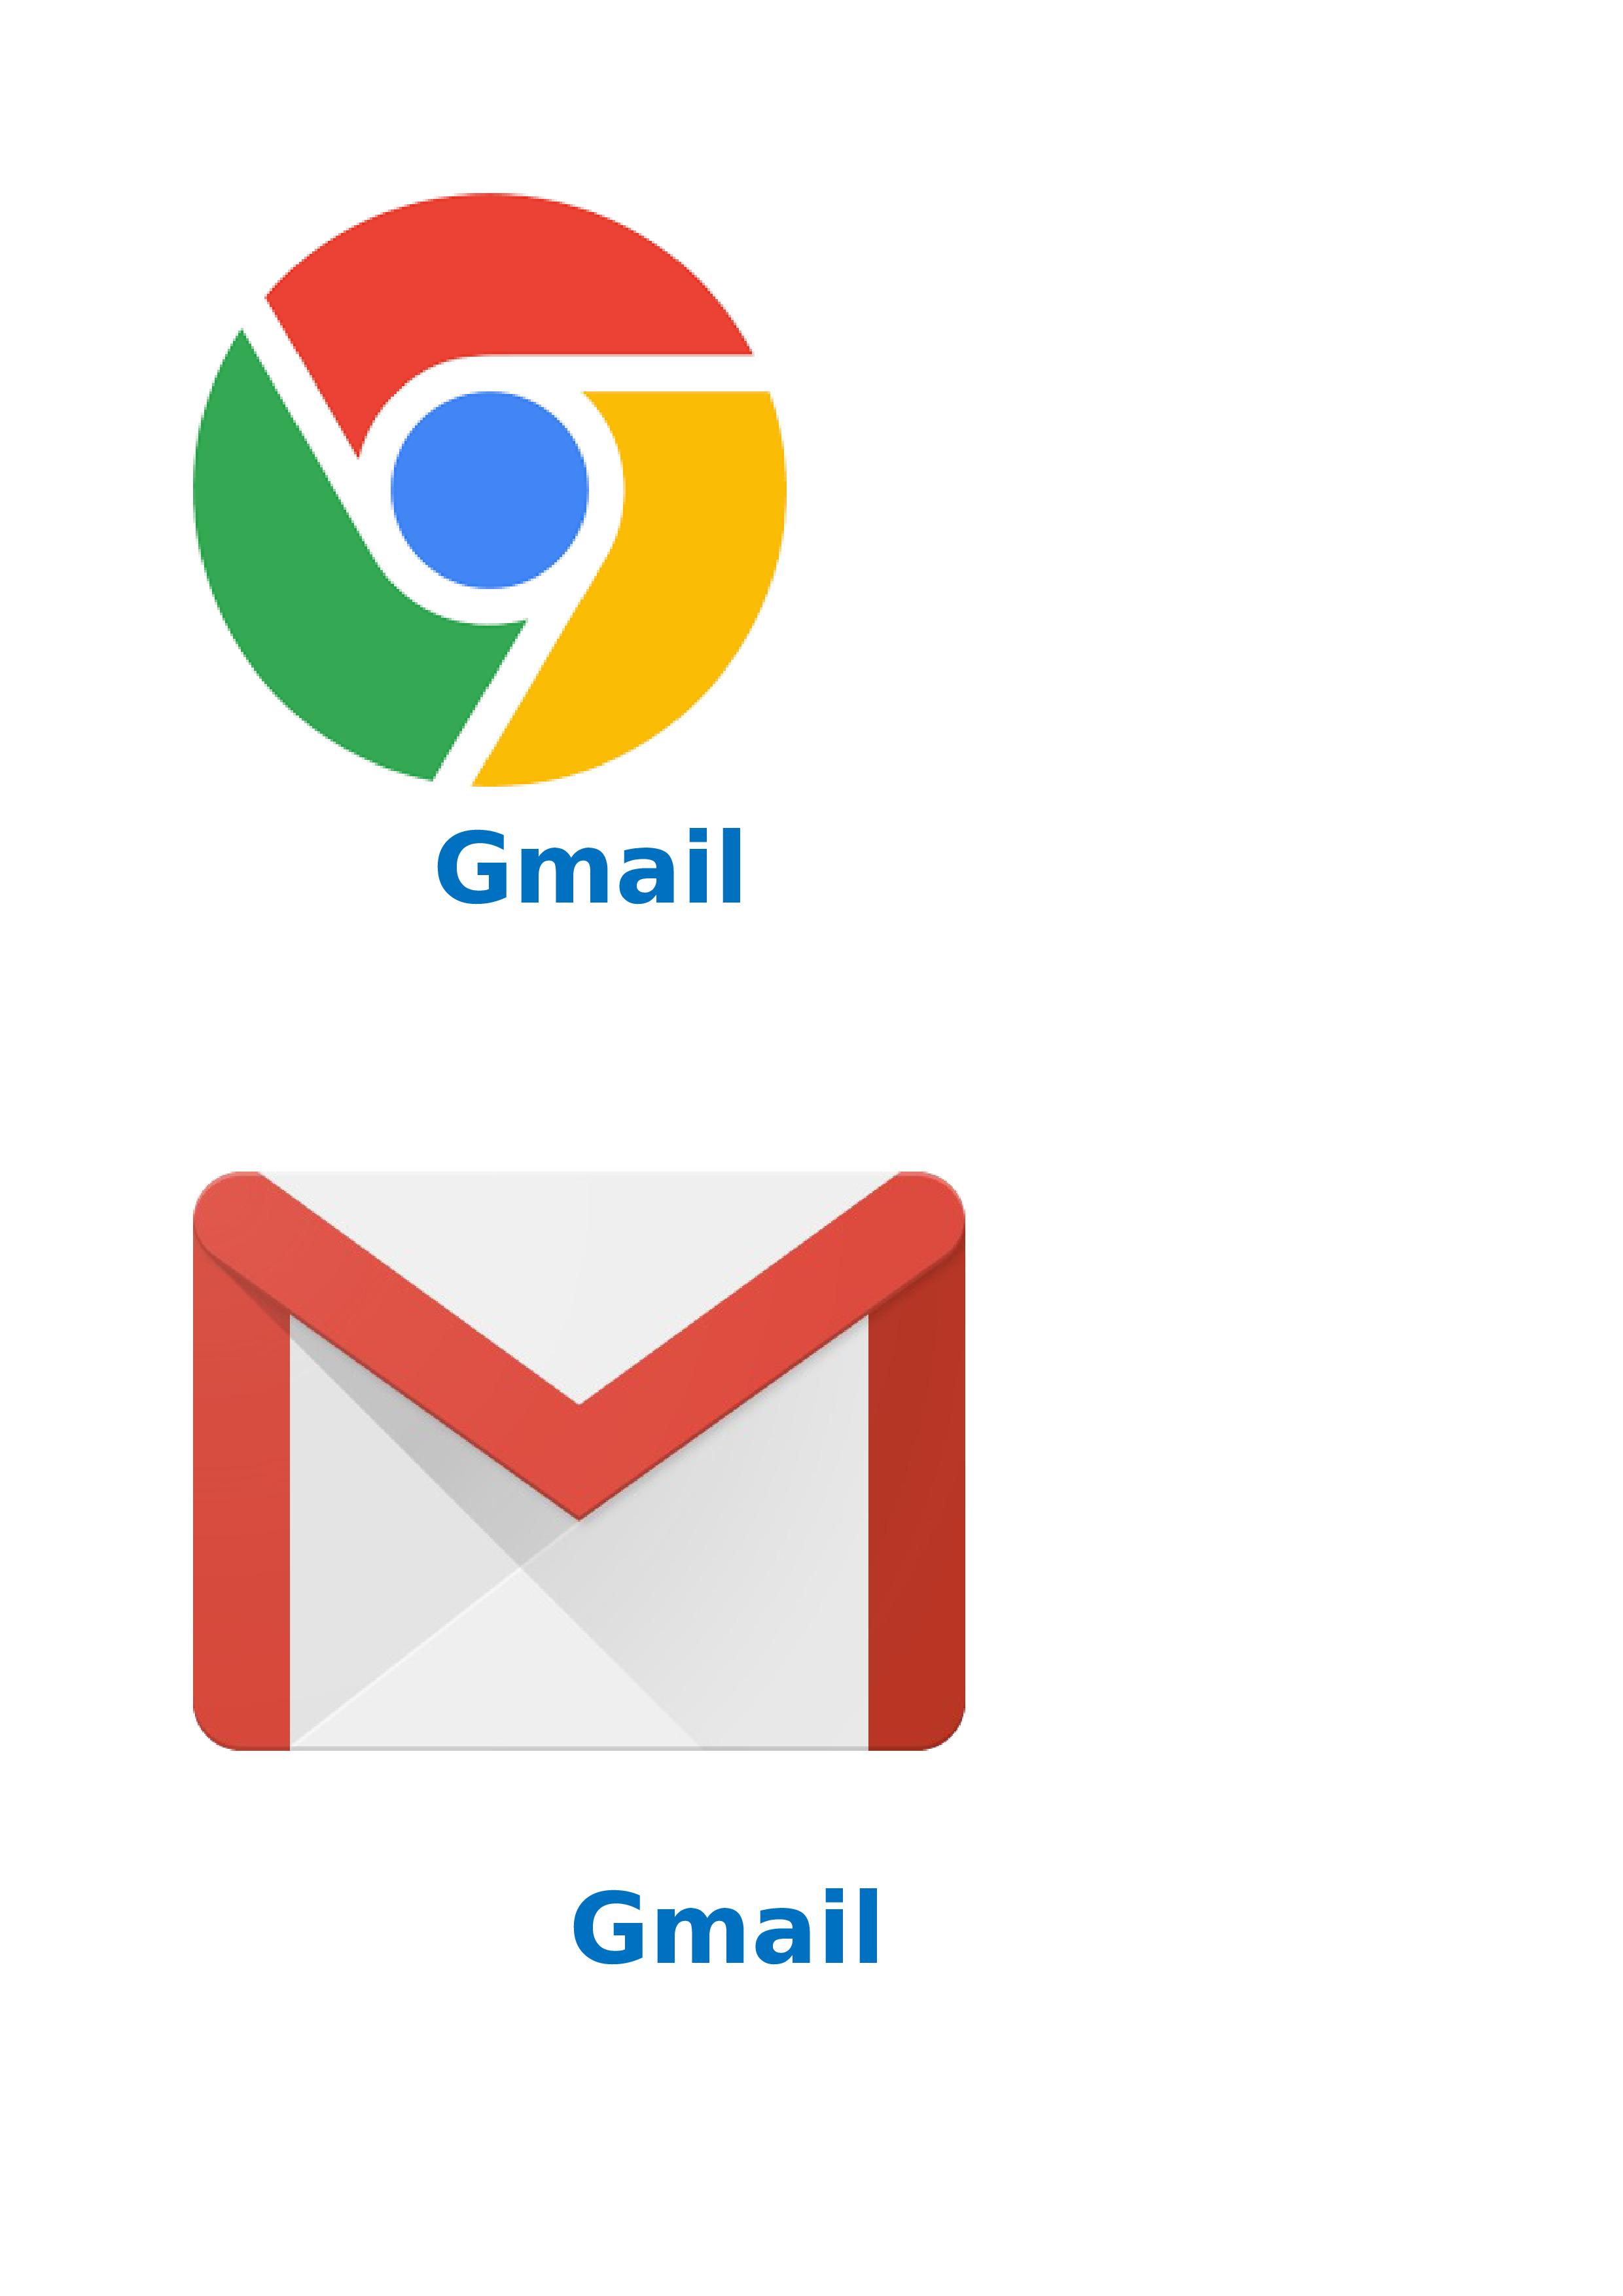 how to put a gmail icon on windows 10 desktop